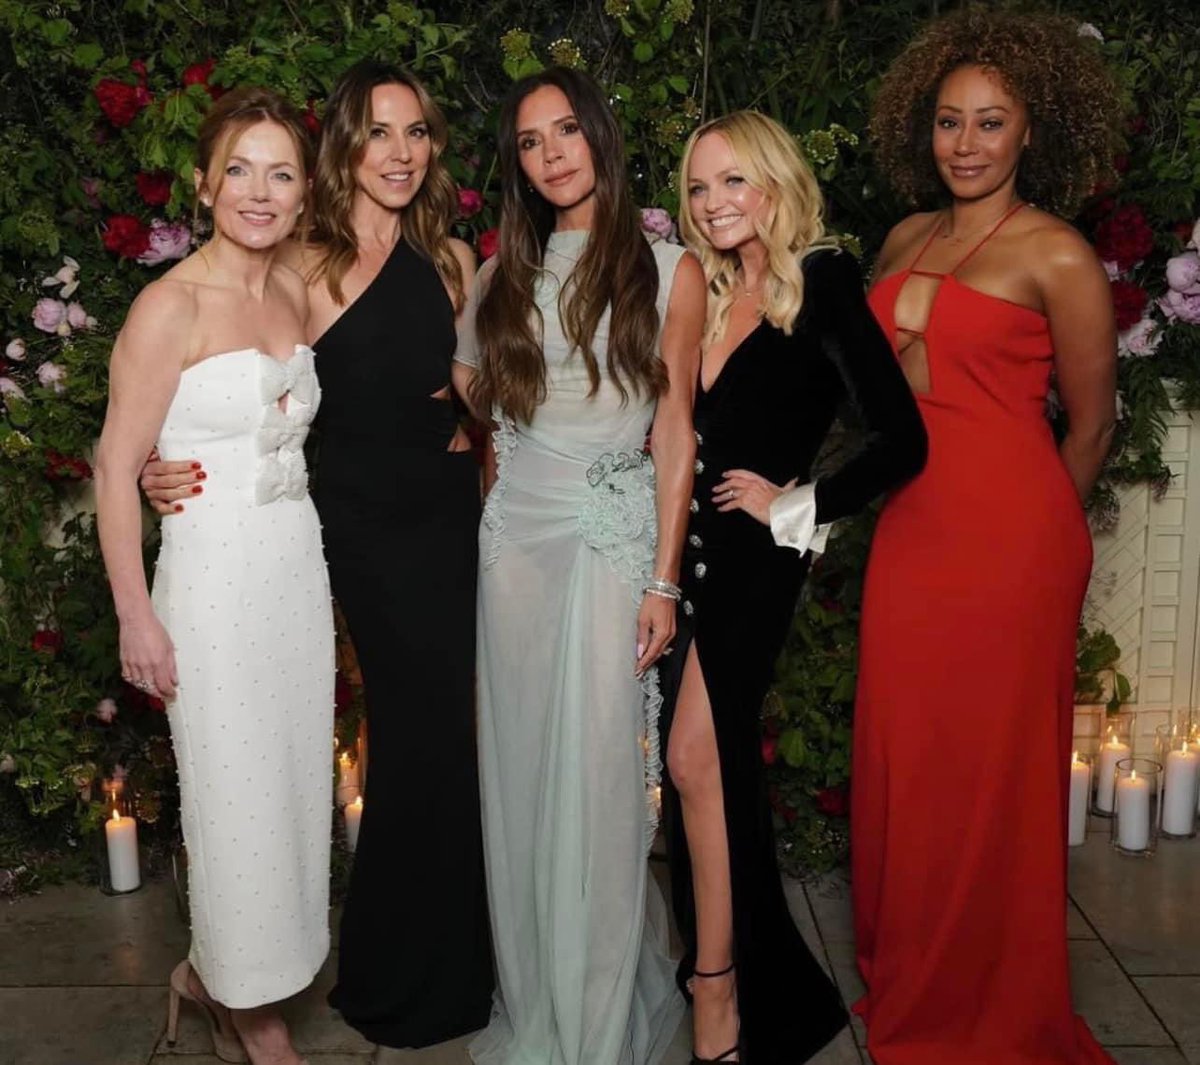 My Spice Girls Reunited For Posh’s Party…..NOW LETS TRANSLATE THIS INTO ANOTHER ALBUM & TOUR PLEEEASE ! THE MUSIC GAME NEEDS THAT GIRL POWER !!! @victoriabeckham @EmmaBunton @GeriHalliwell @OfficialMelB @MelanieCmusic @spicegirls